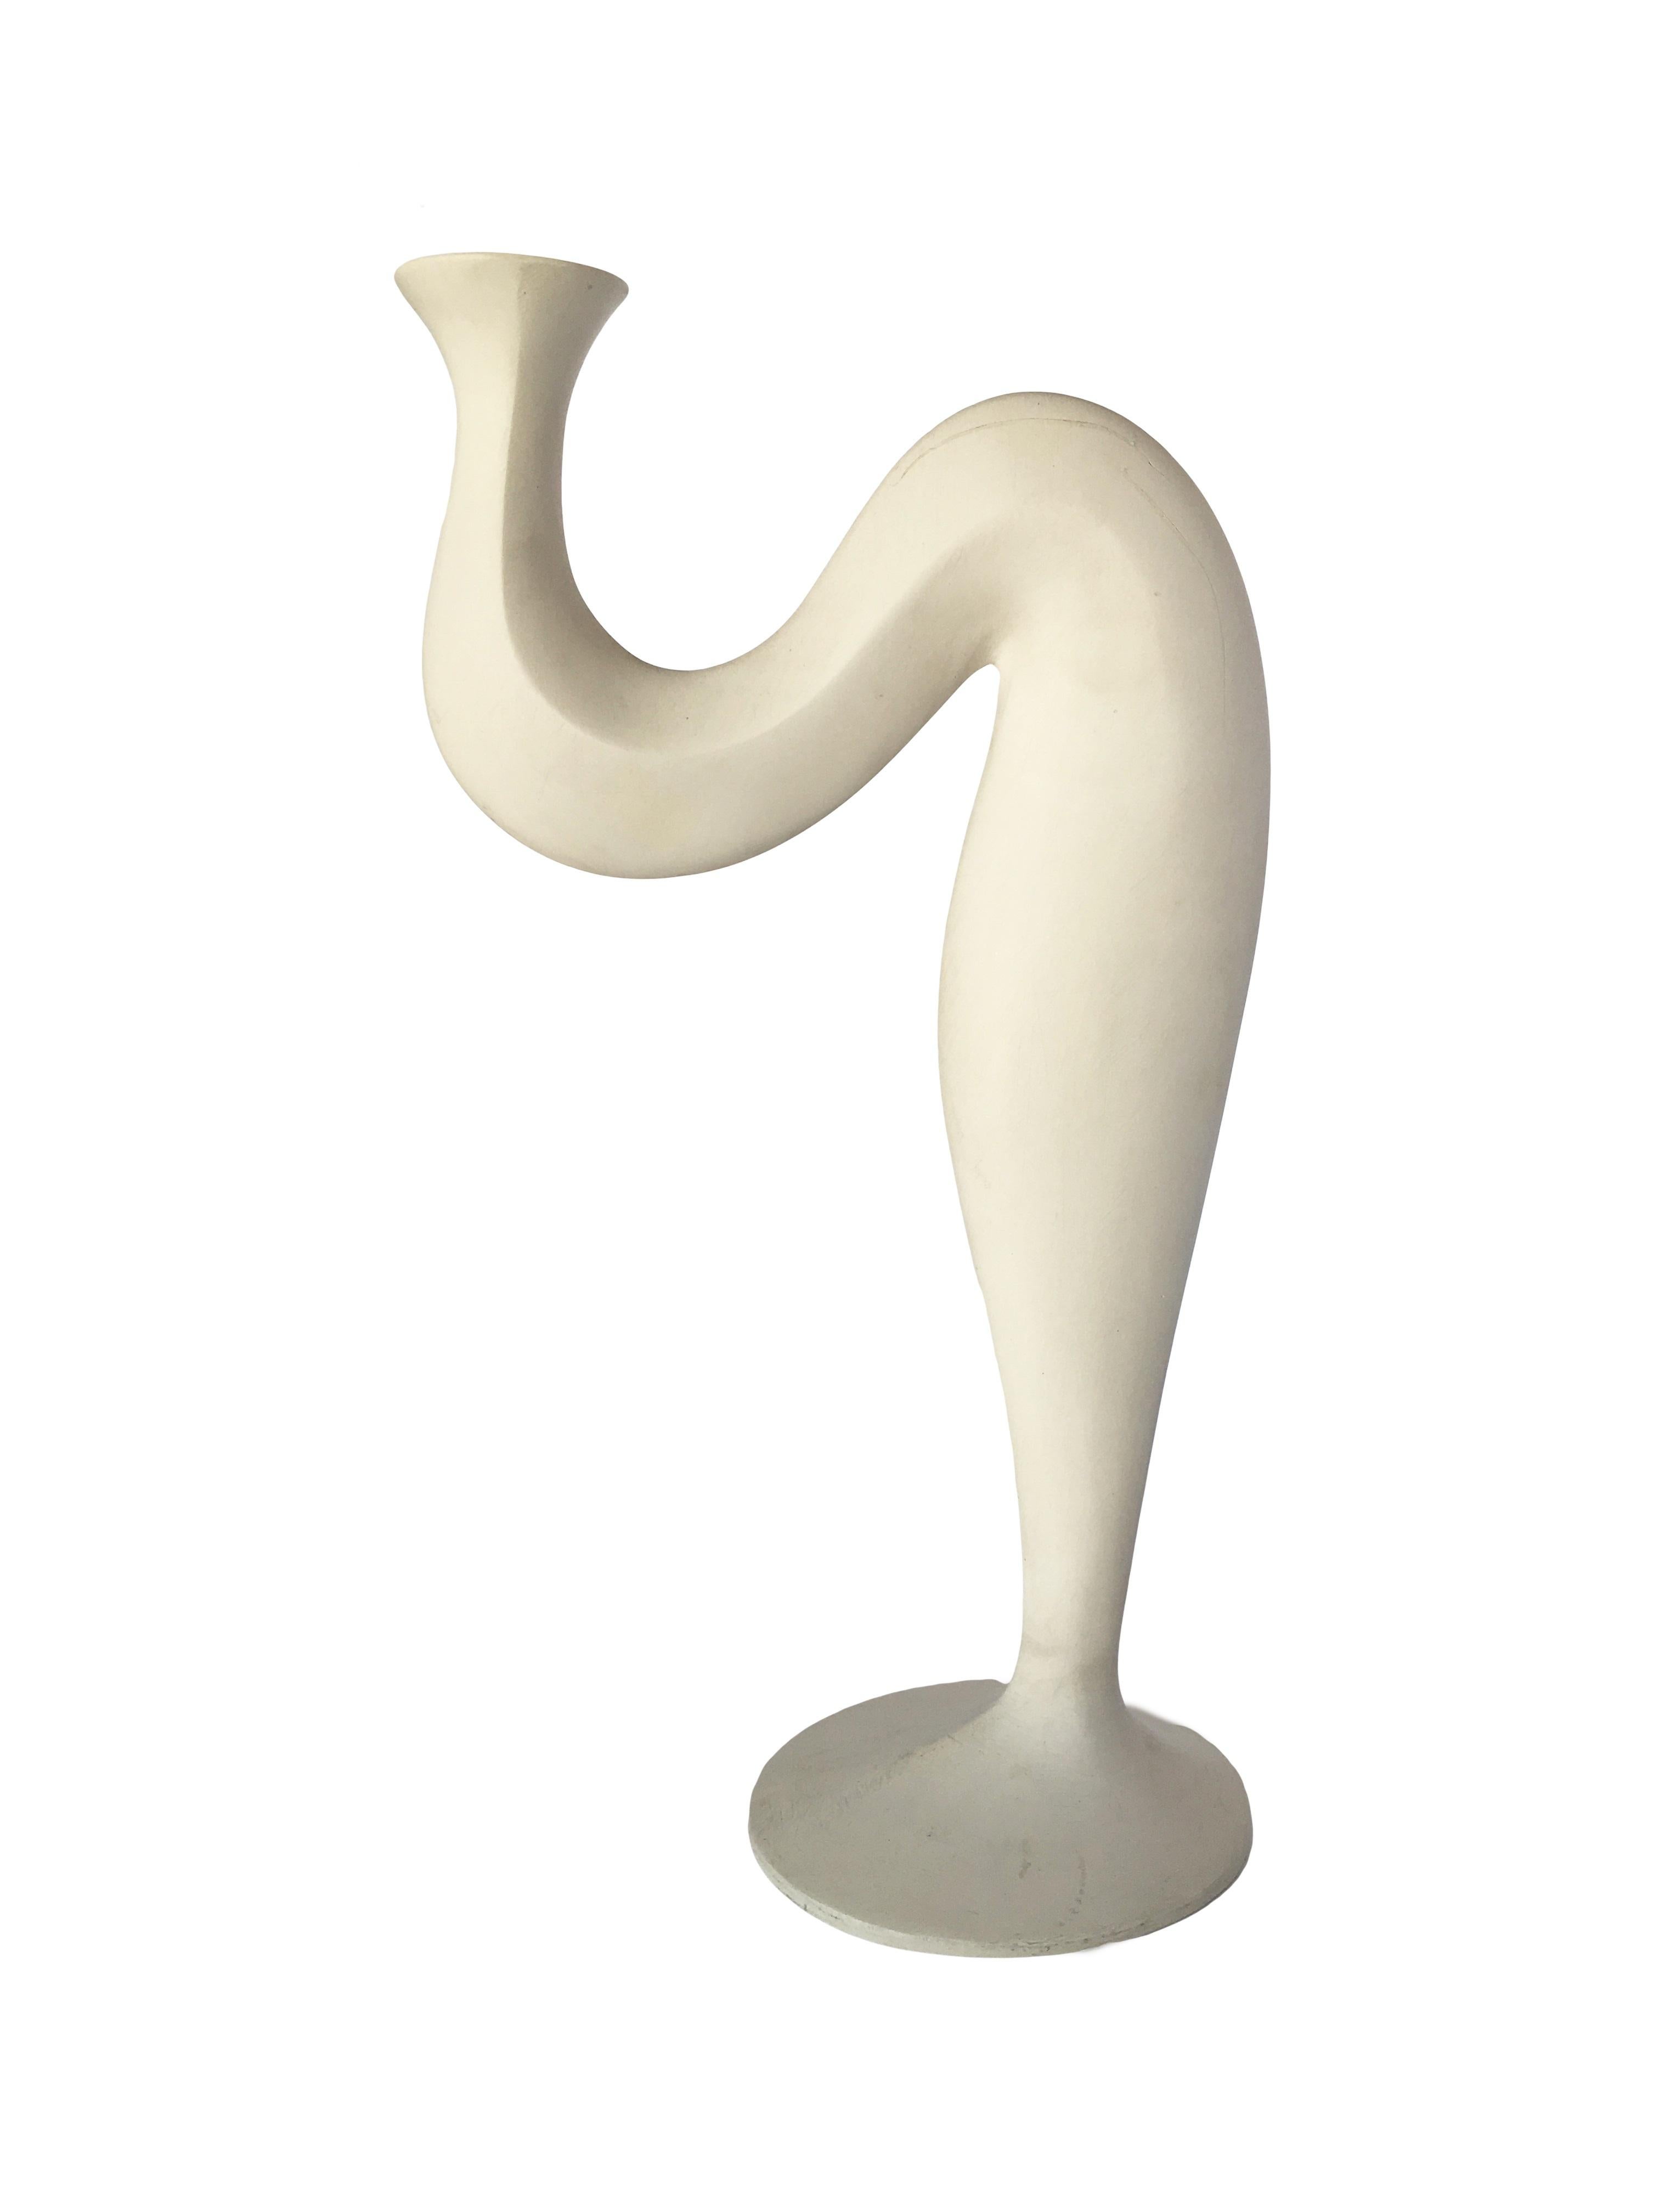 Custom hand-sculpted resin Post-Modern candlestick holder painted in white, Pair. Circa 1970